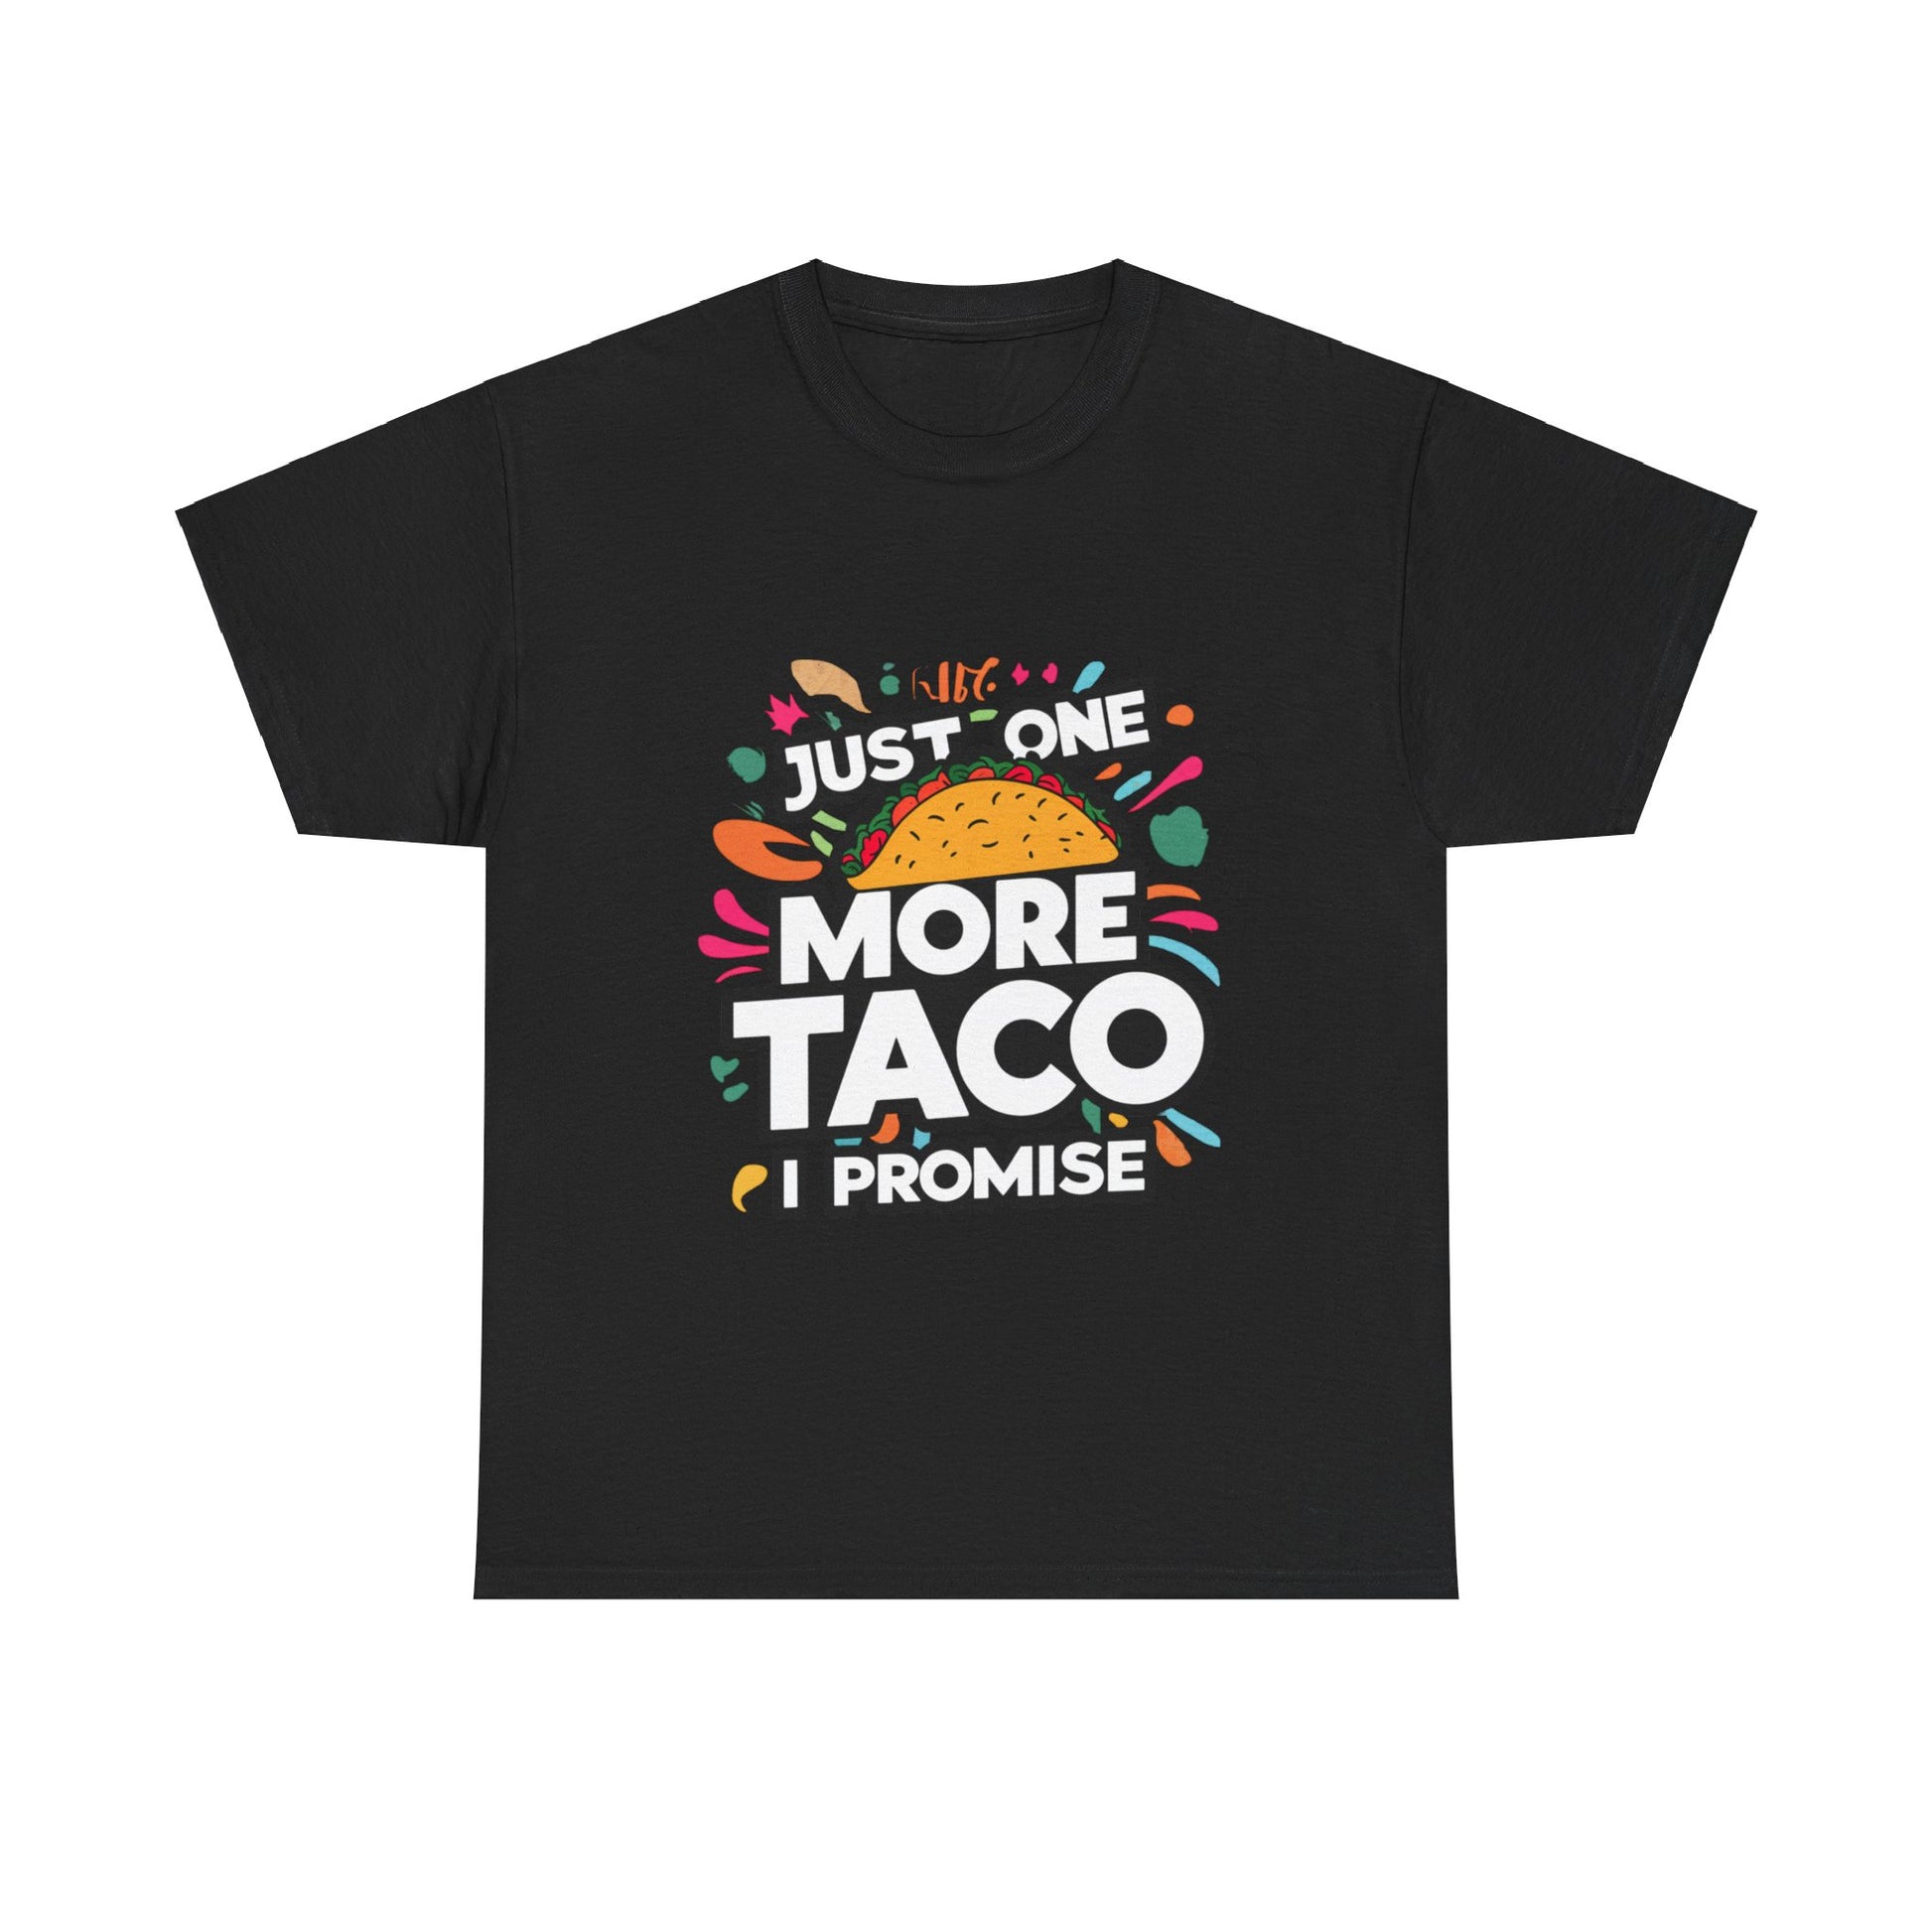 Just One More Taco I Promise Mexican Food Graphic Unisex Heavy Cotton Tee Cotton Funny Humorous Graphic Soft Premium Unisex Men Women Black T-shirt Birthday Gift-1